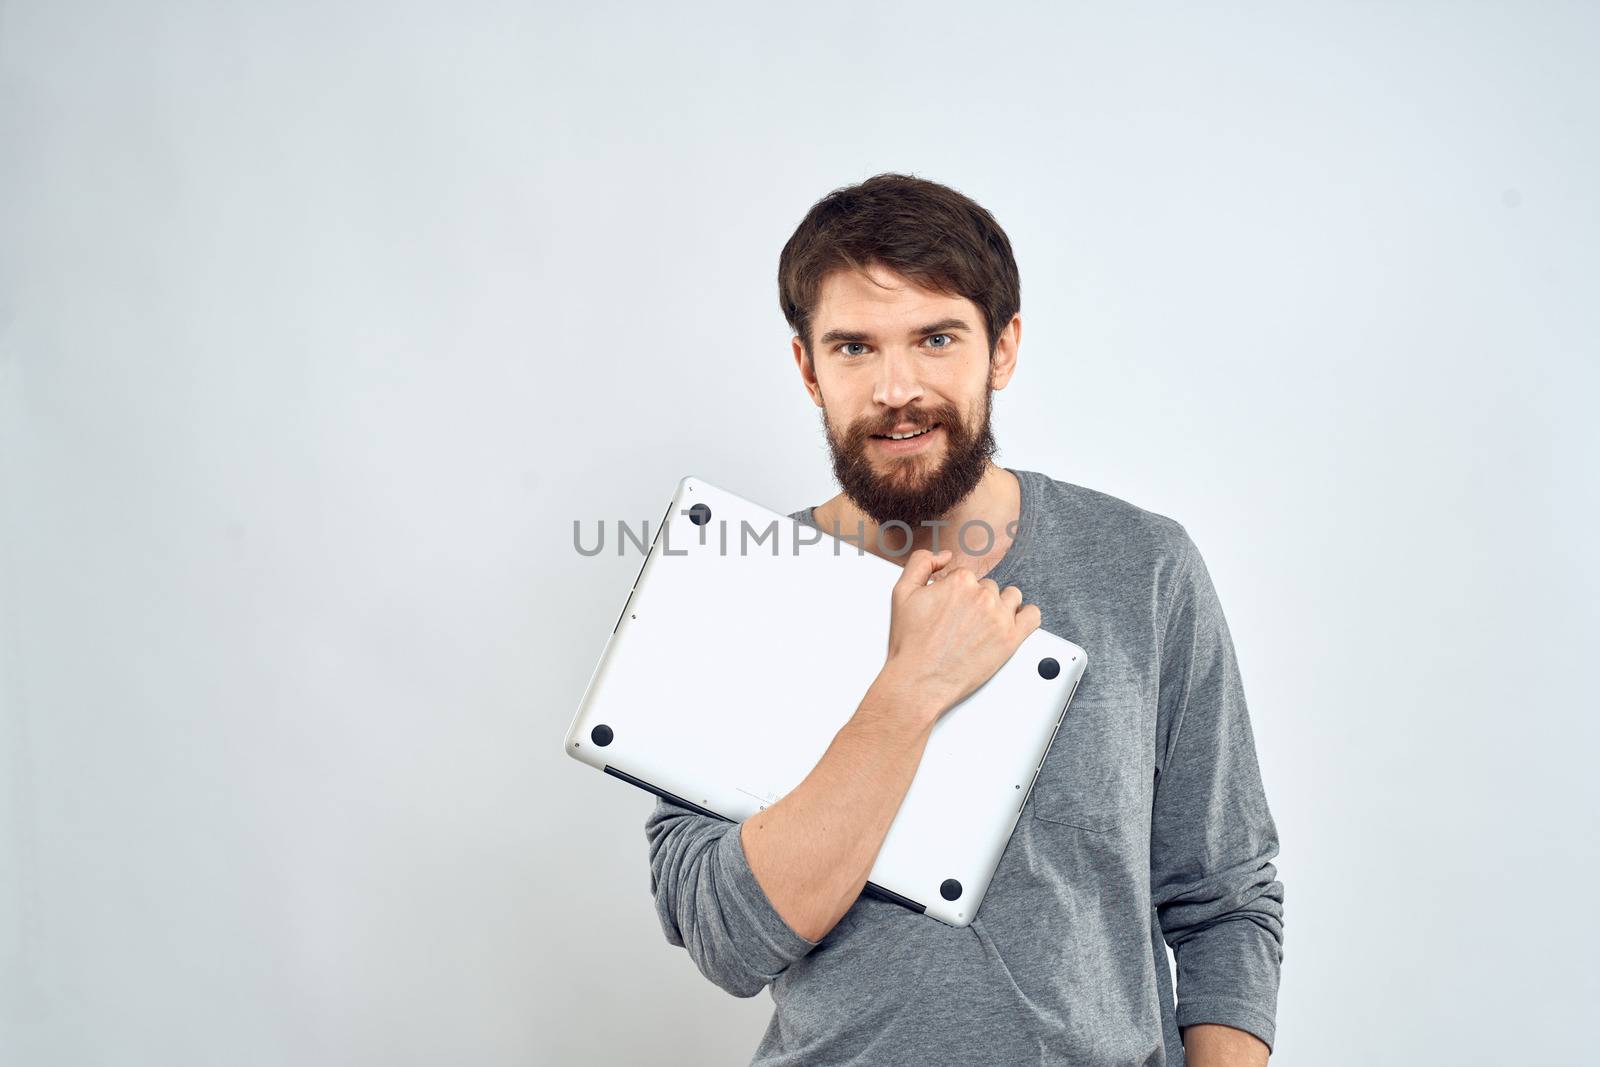 Man with laptop in hands technology internet self-confidence light background by SHOTPRIME